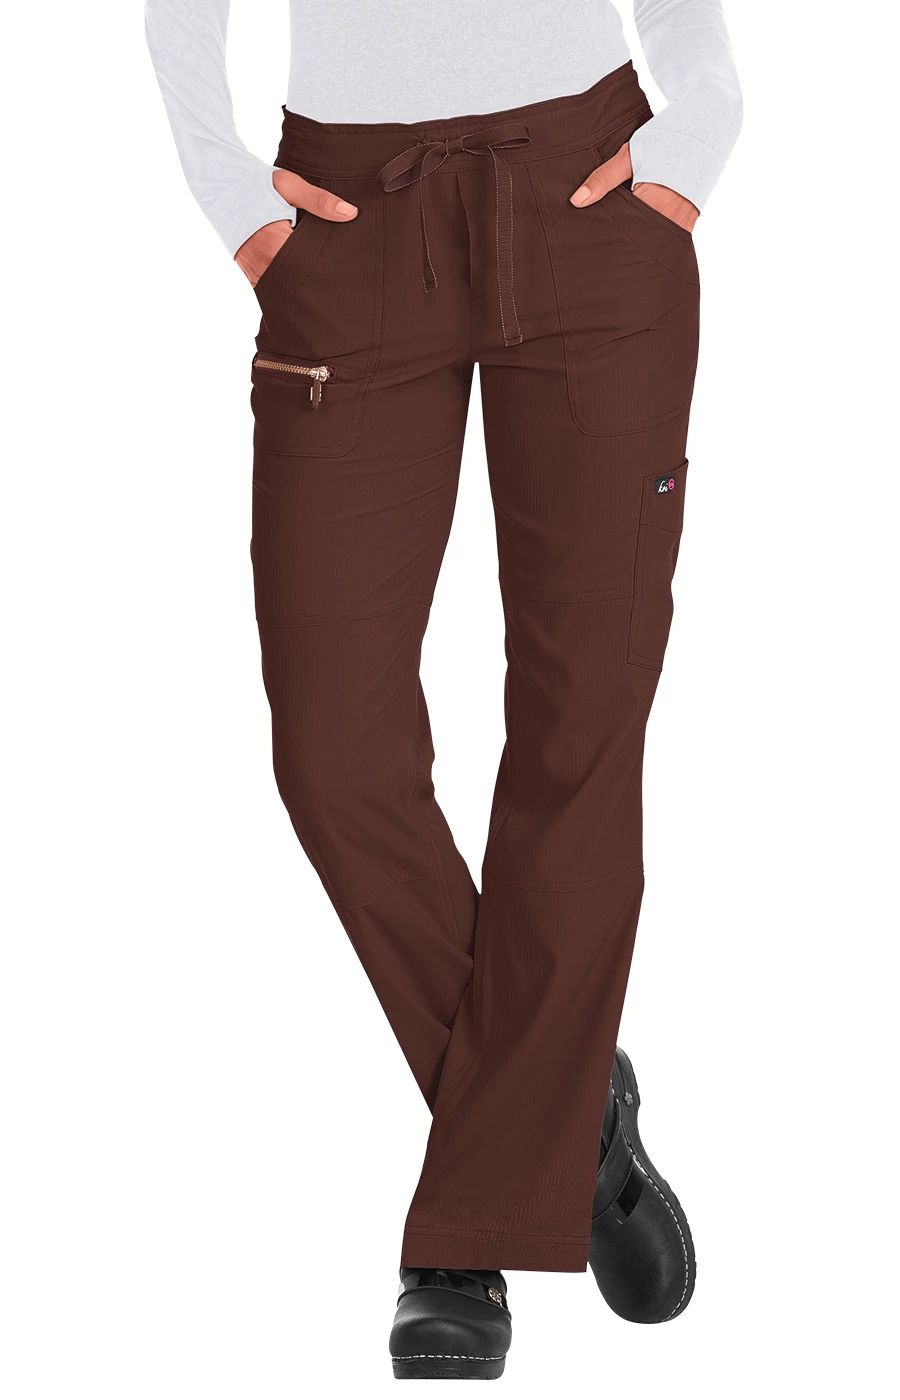 peace-pant-limited-edition-brown-taupe